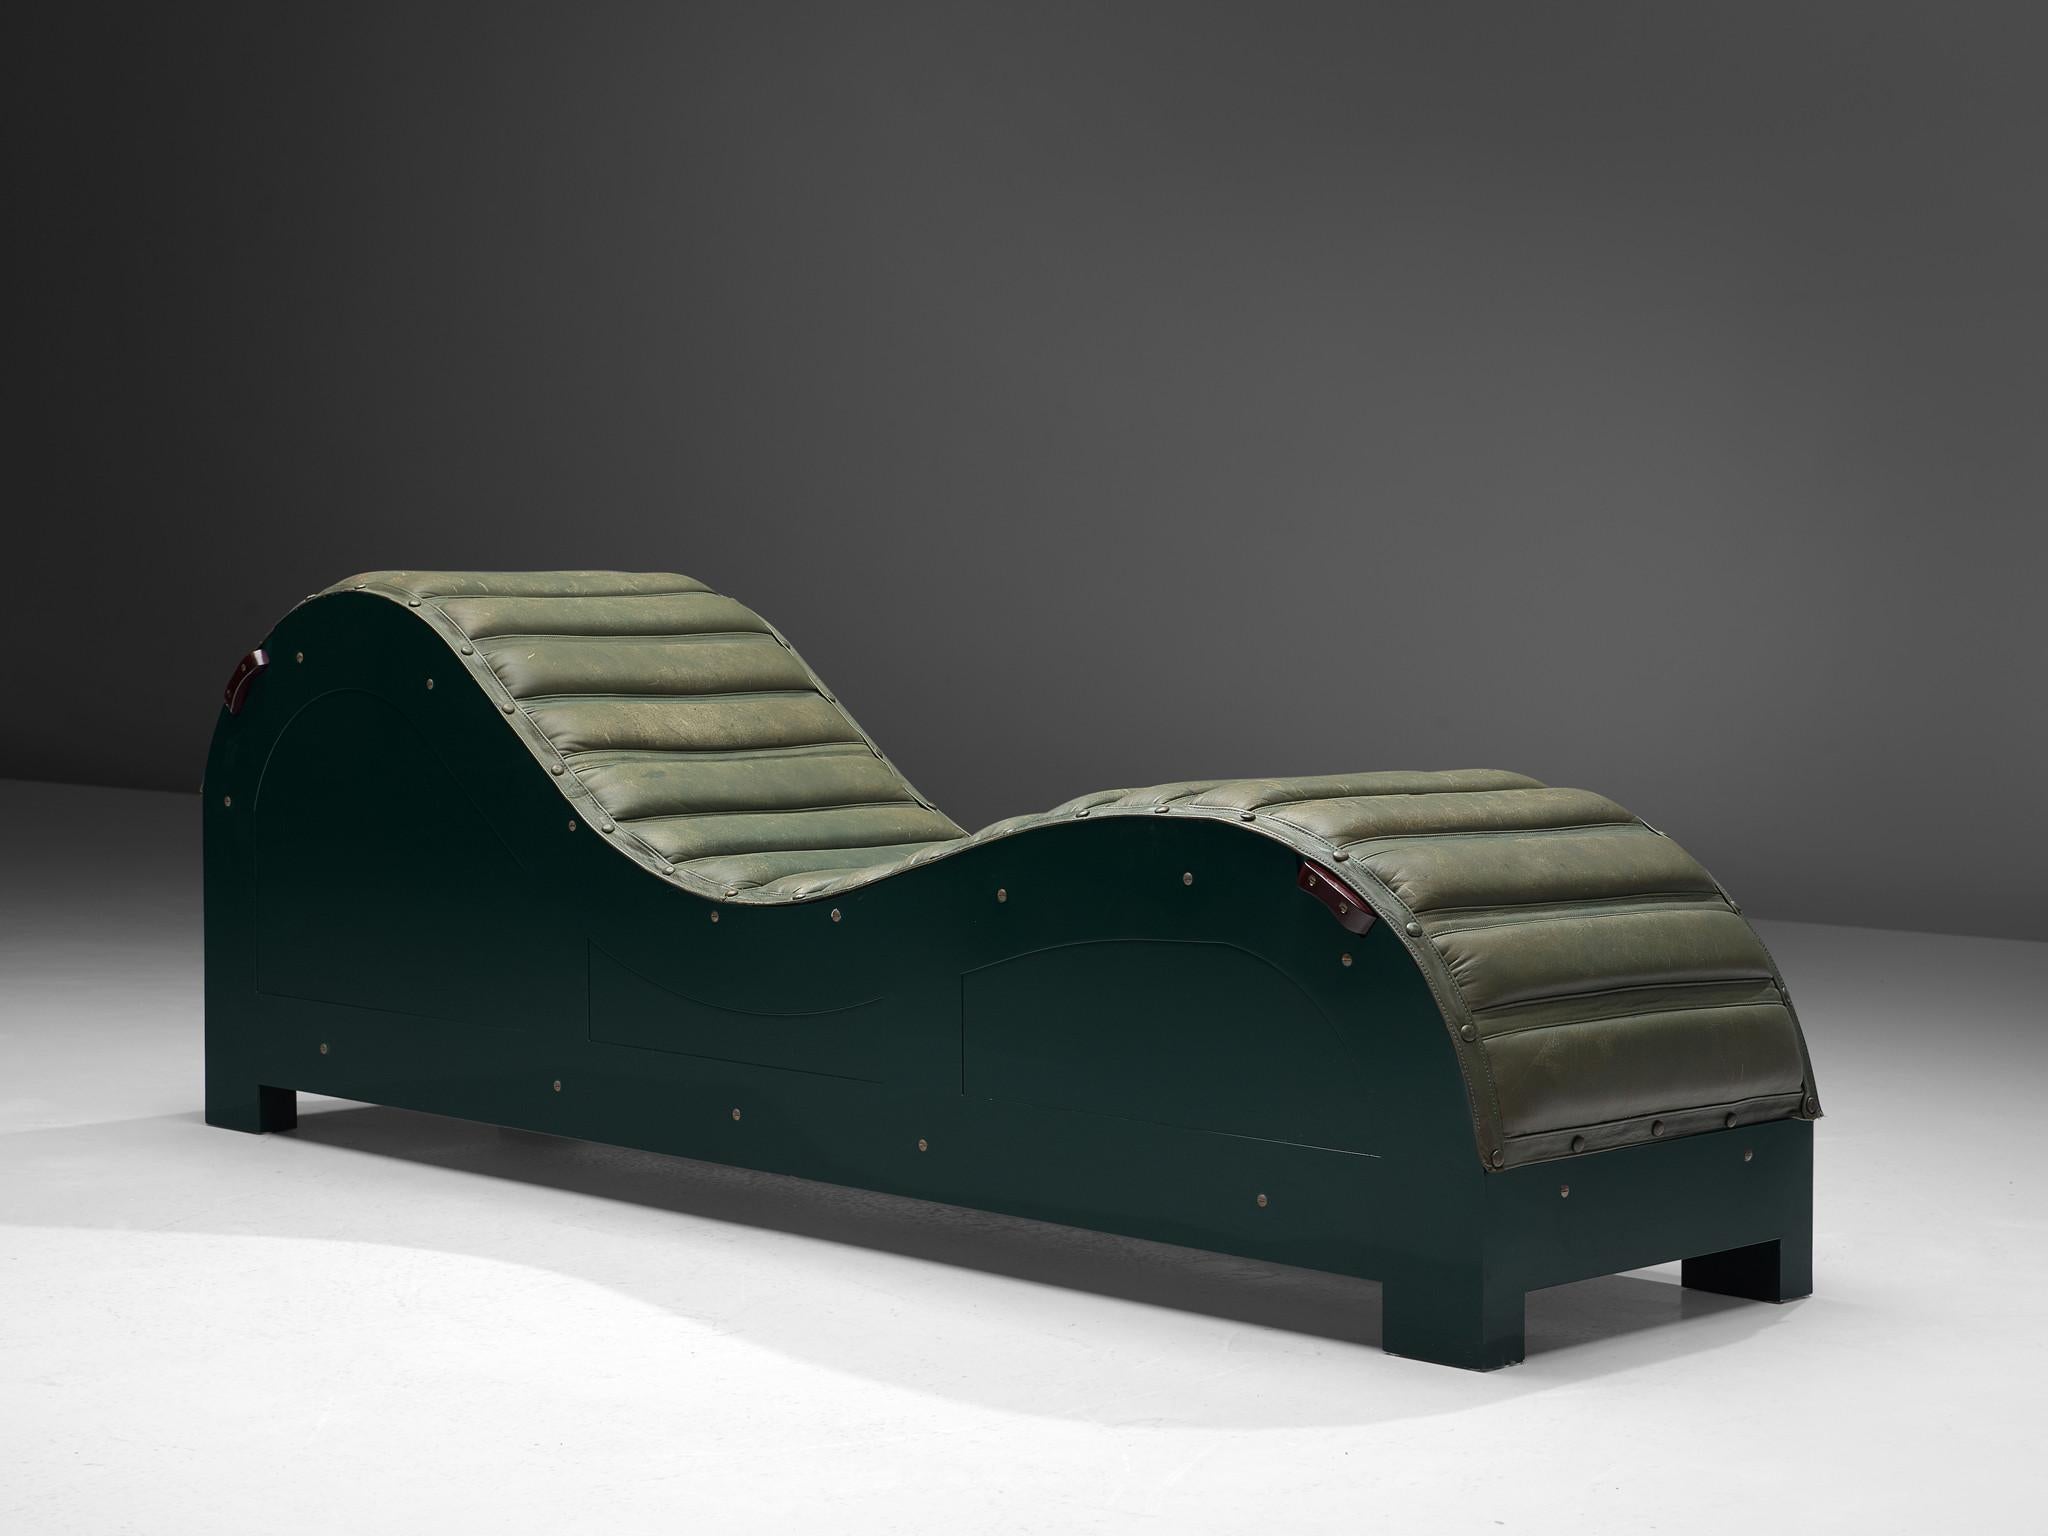 Mats Theselius for Källemo, chaise longue 8/50, steel, patinated leather felt, Sweden, 1992

Limited edition daybed by Swedish designer Mats Theselius. The chaise lounge consists of a base in green steel and a green leather seating. What